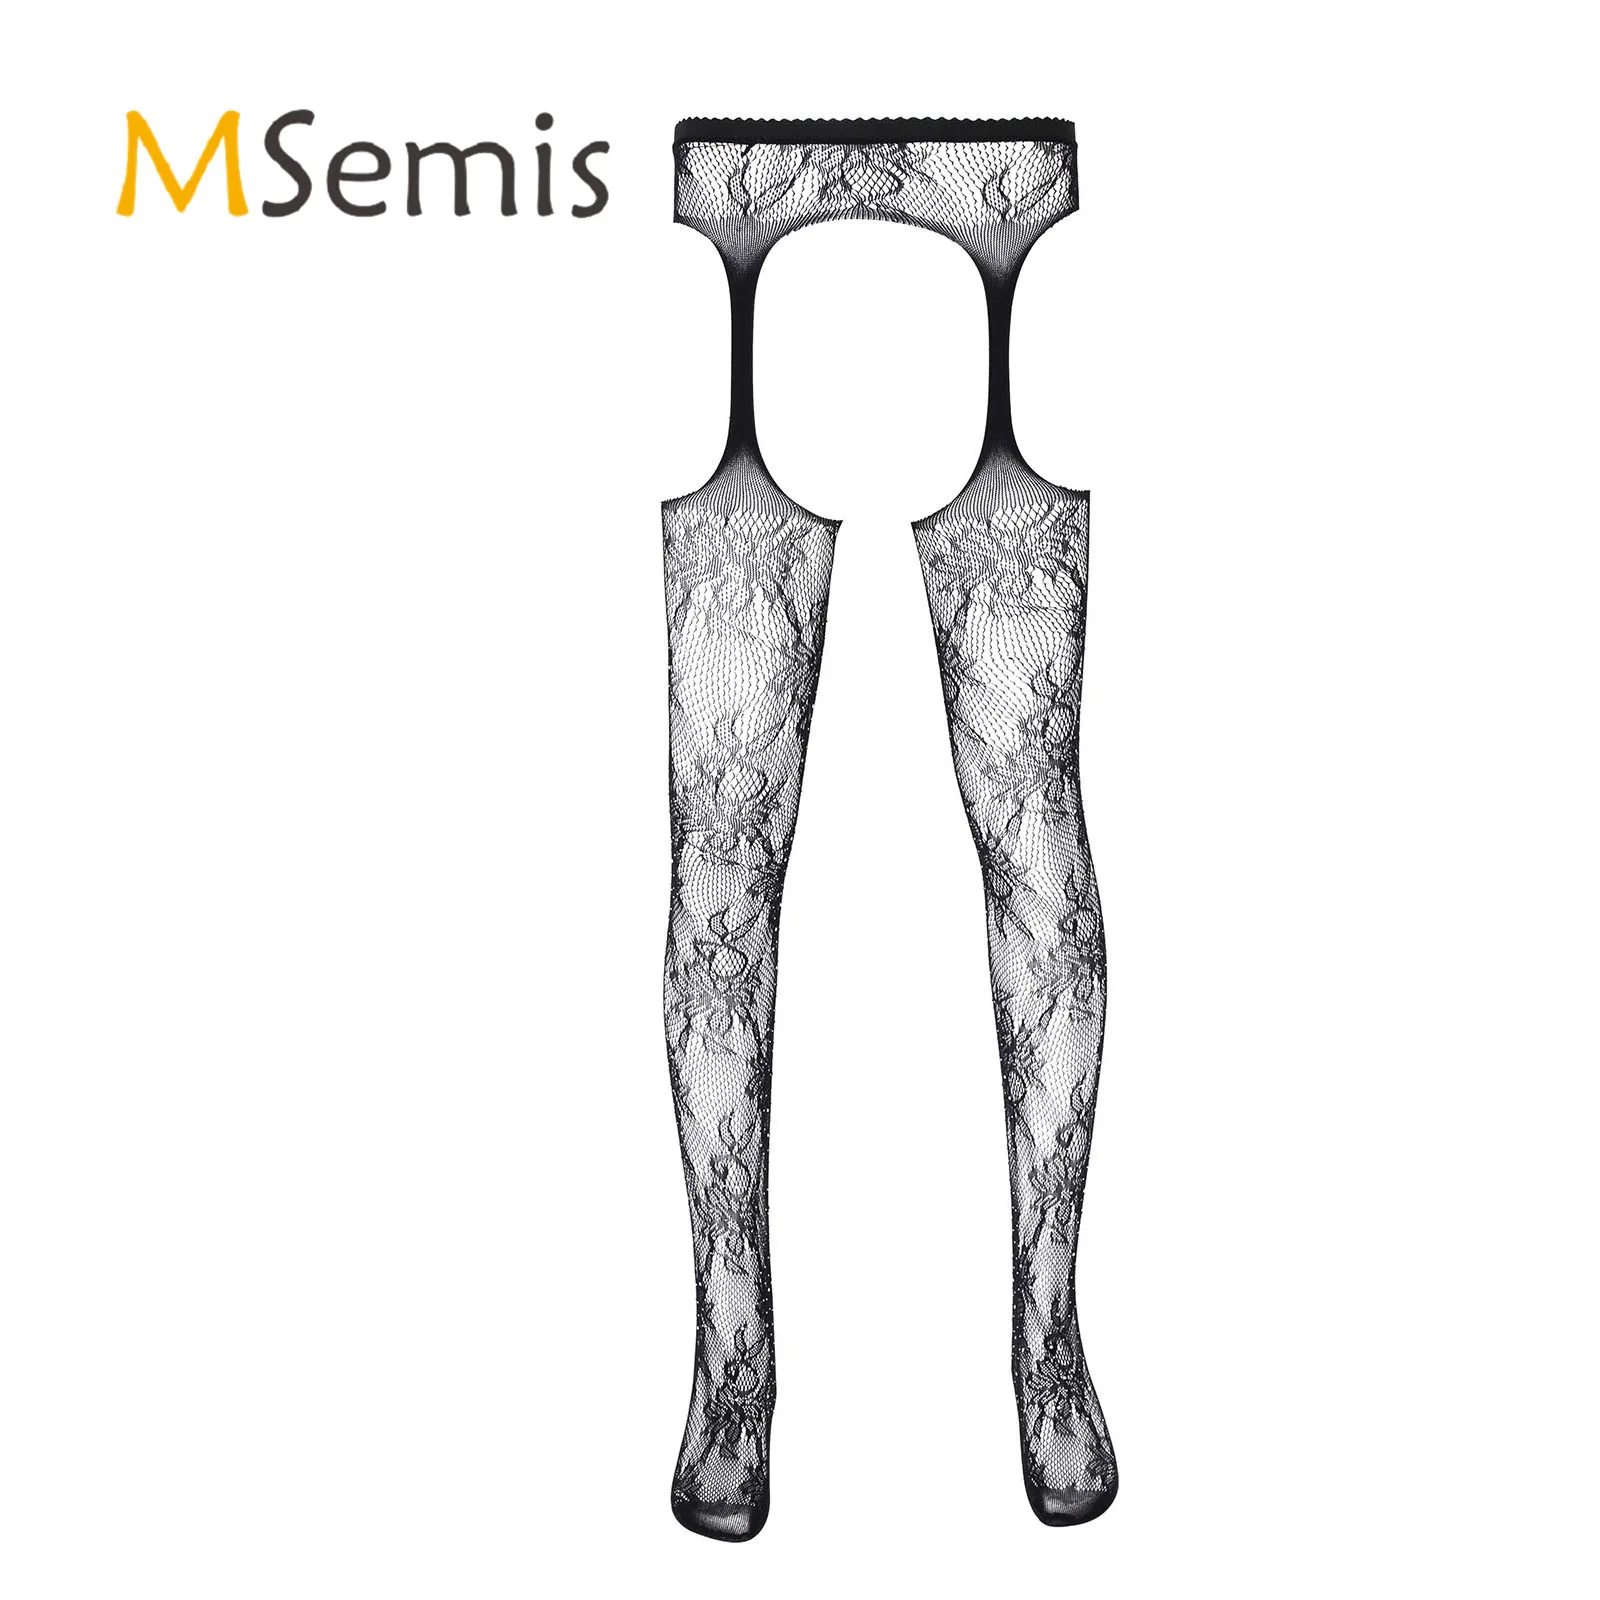 

Mens Lingerie Crotchless Stretchy Hollow Out Sexy Socks Fishnet Stockings Tights See-through Pantyhose Nightwear Clubwear